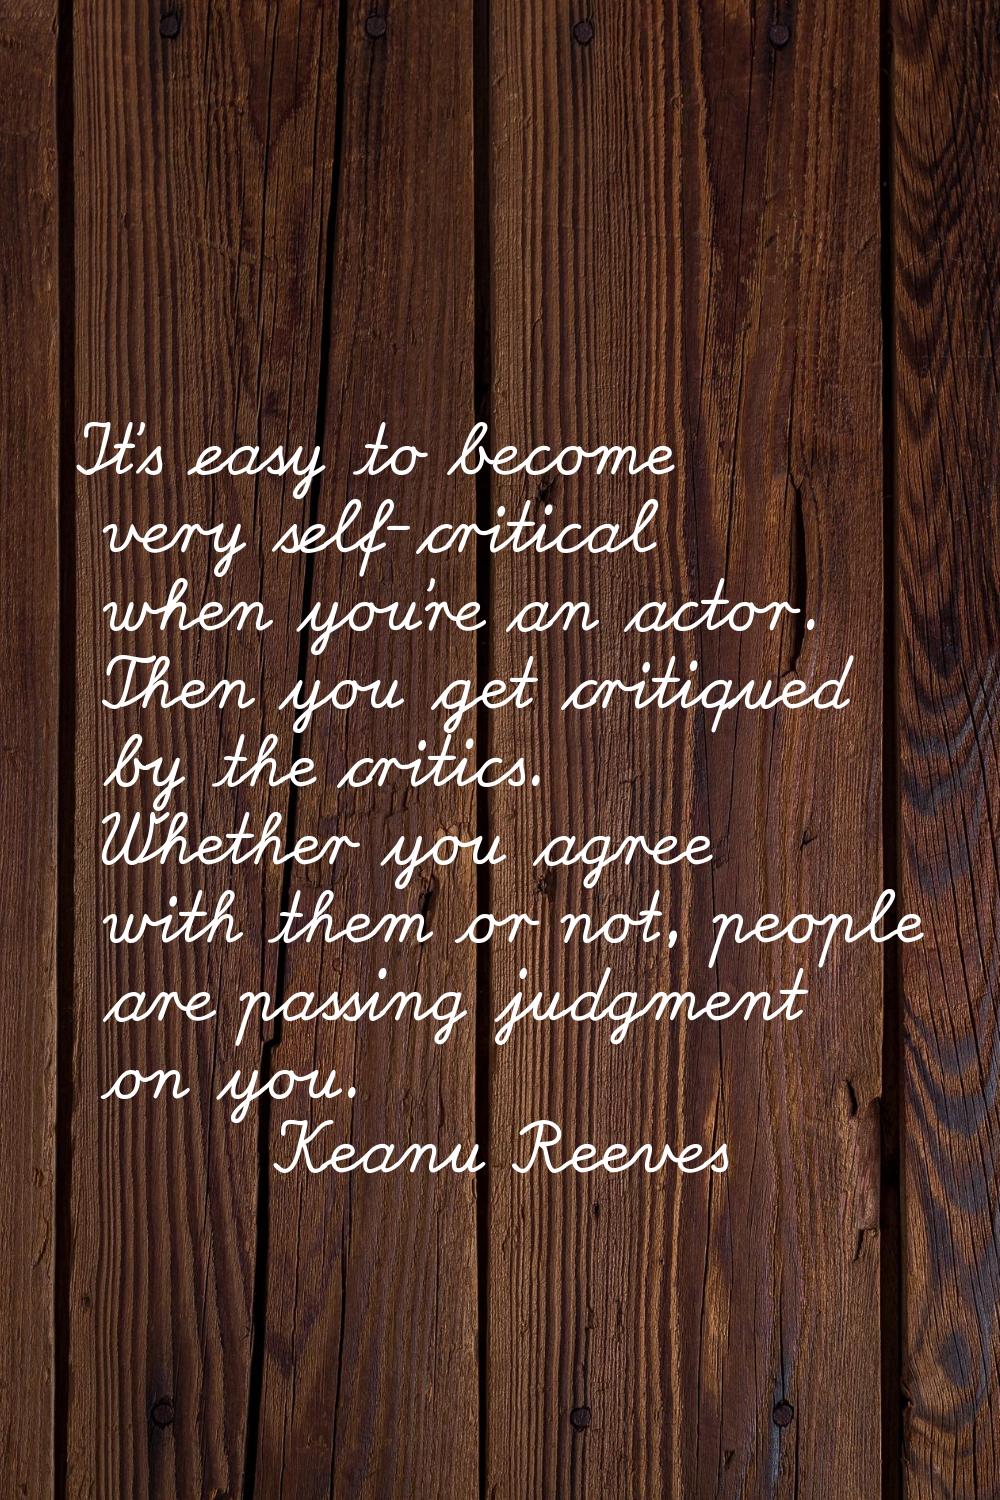 It's easy to become very self-critical when you're an actor. Then you get critiqued by the critics.